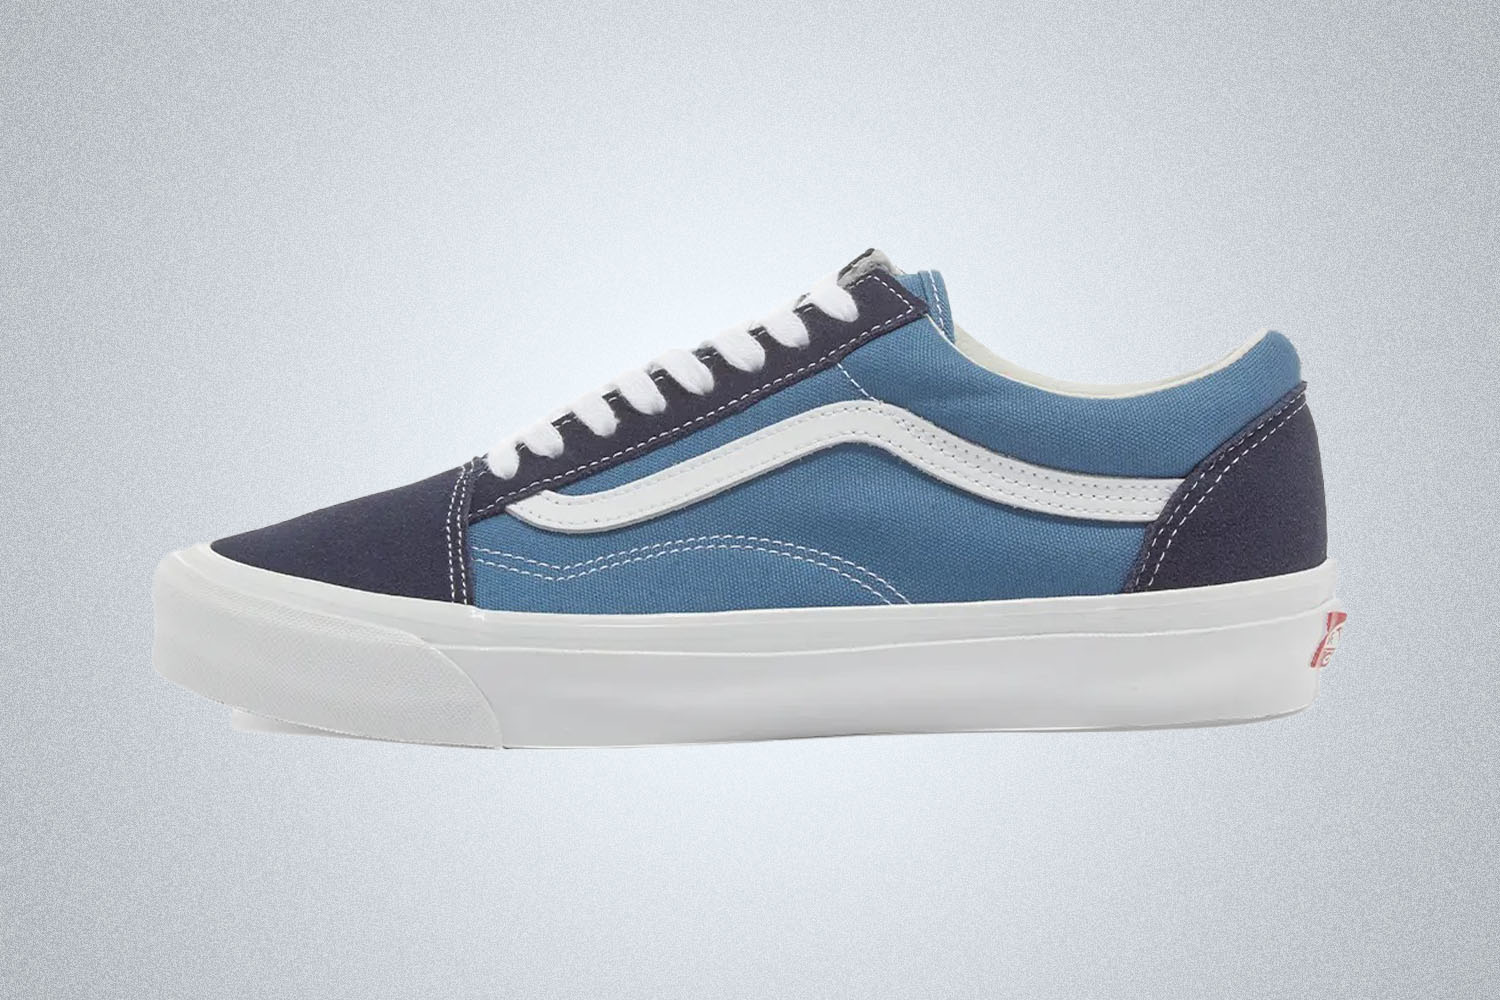 a pair of light blue and dark blue vans from End. Clothing on a grey background